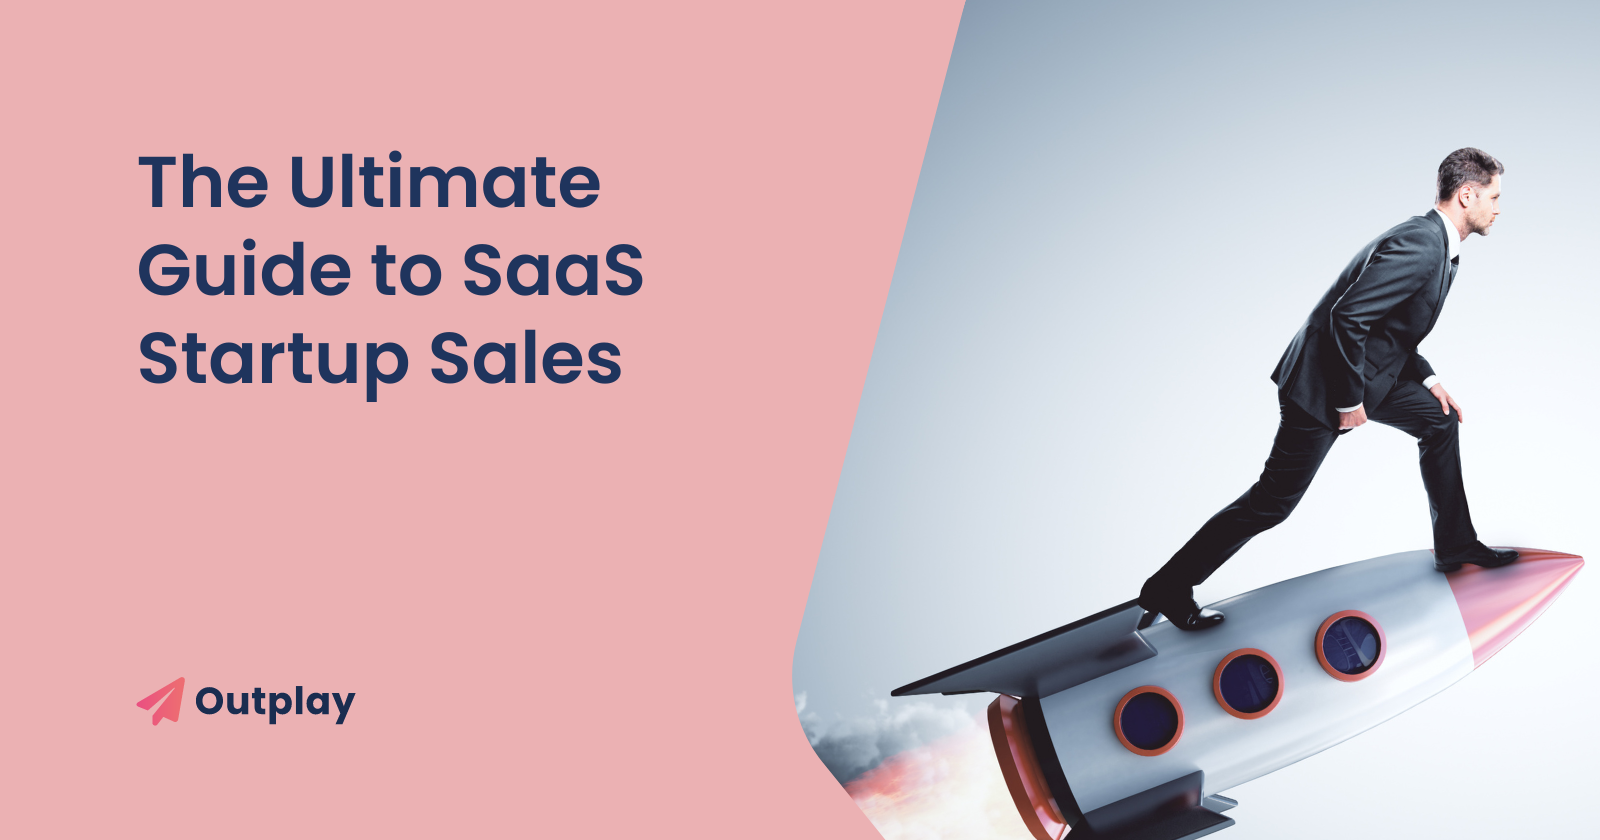 The Ultimate Guide to SaaS Startup Sales 